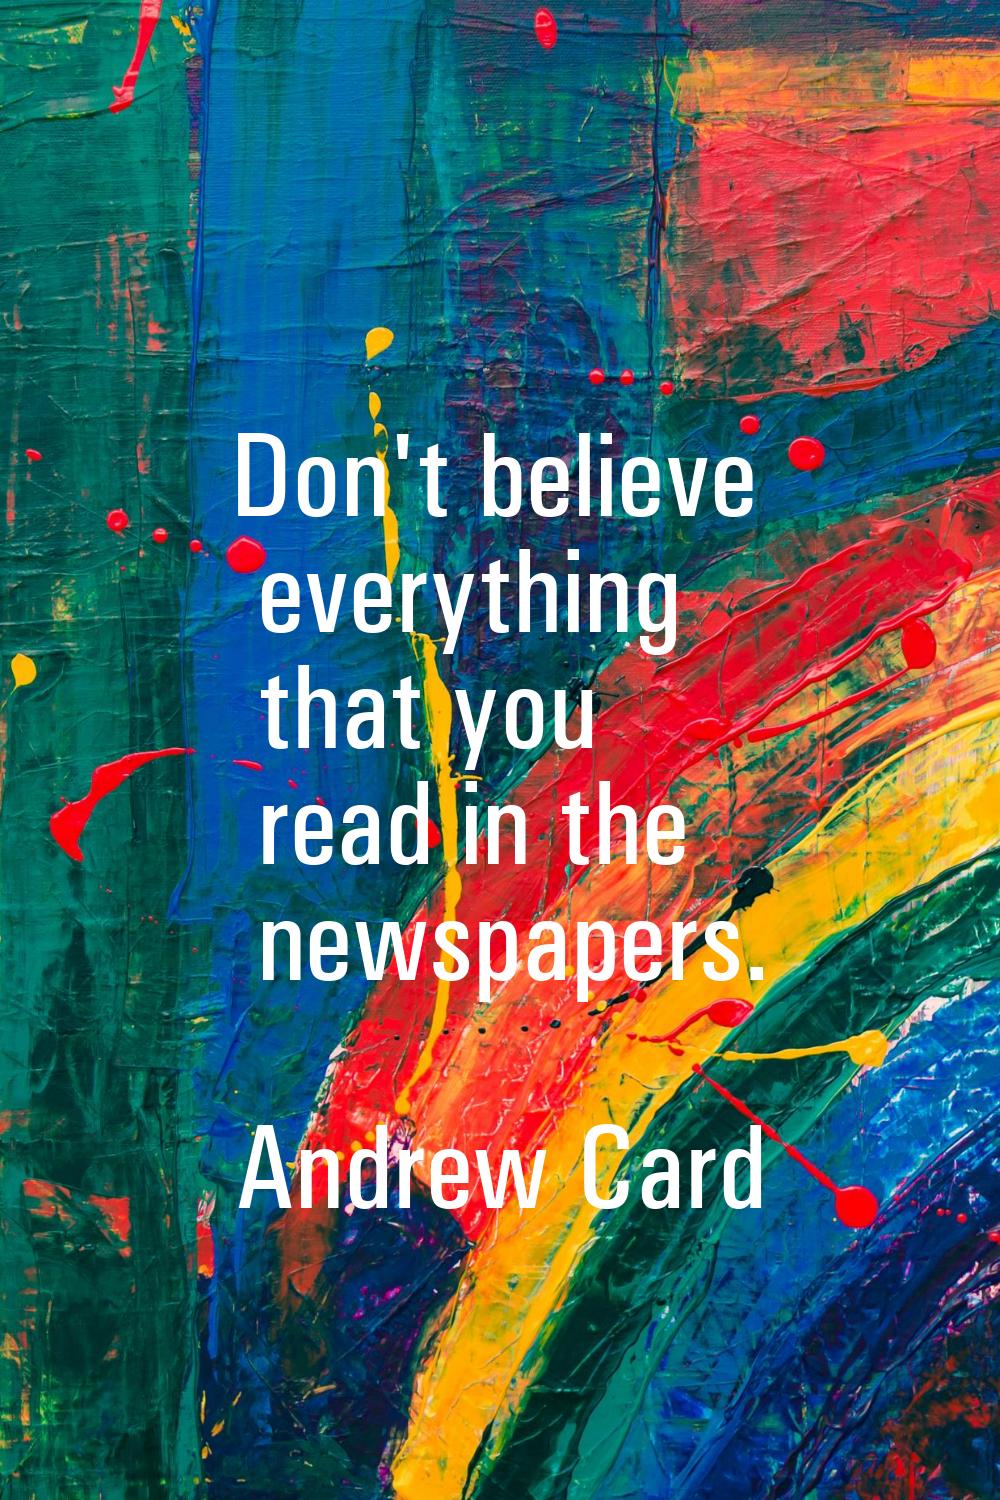 Don't believe everything that you read in the newspapers.